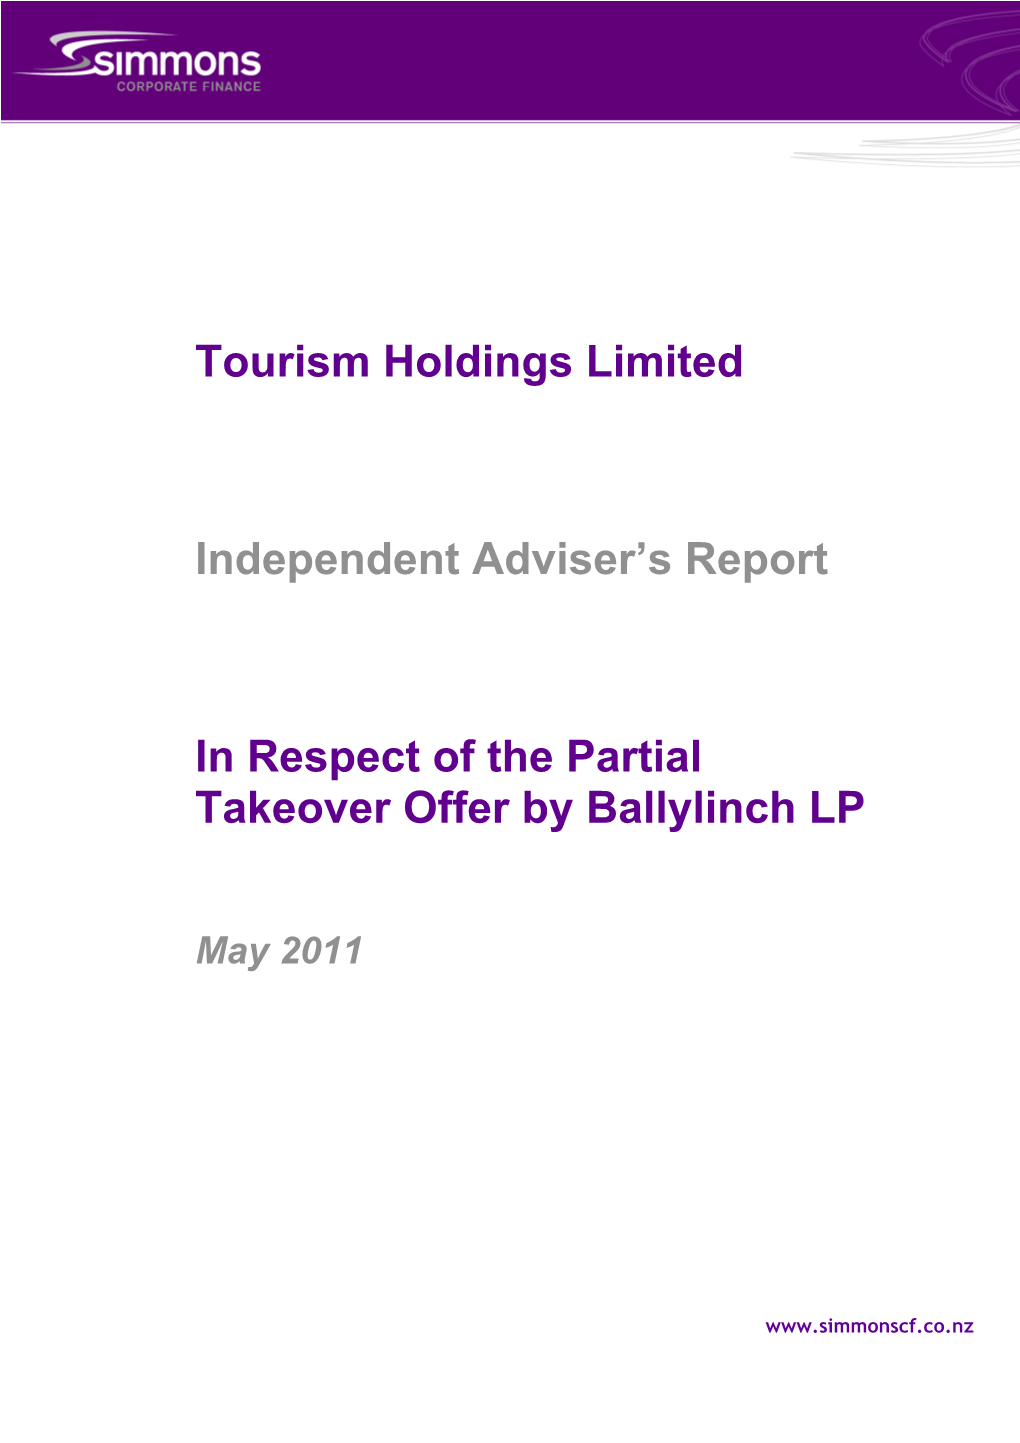 Tourism Holdings Limited Independent Adviser's Report in Respect of the Partial Takeover Offer by Ballylinch LP